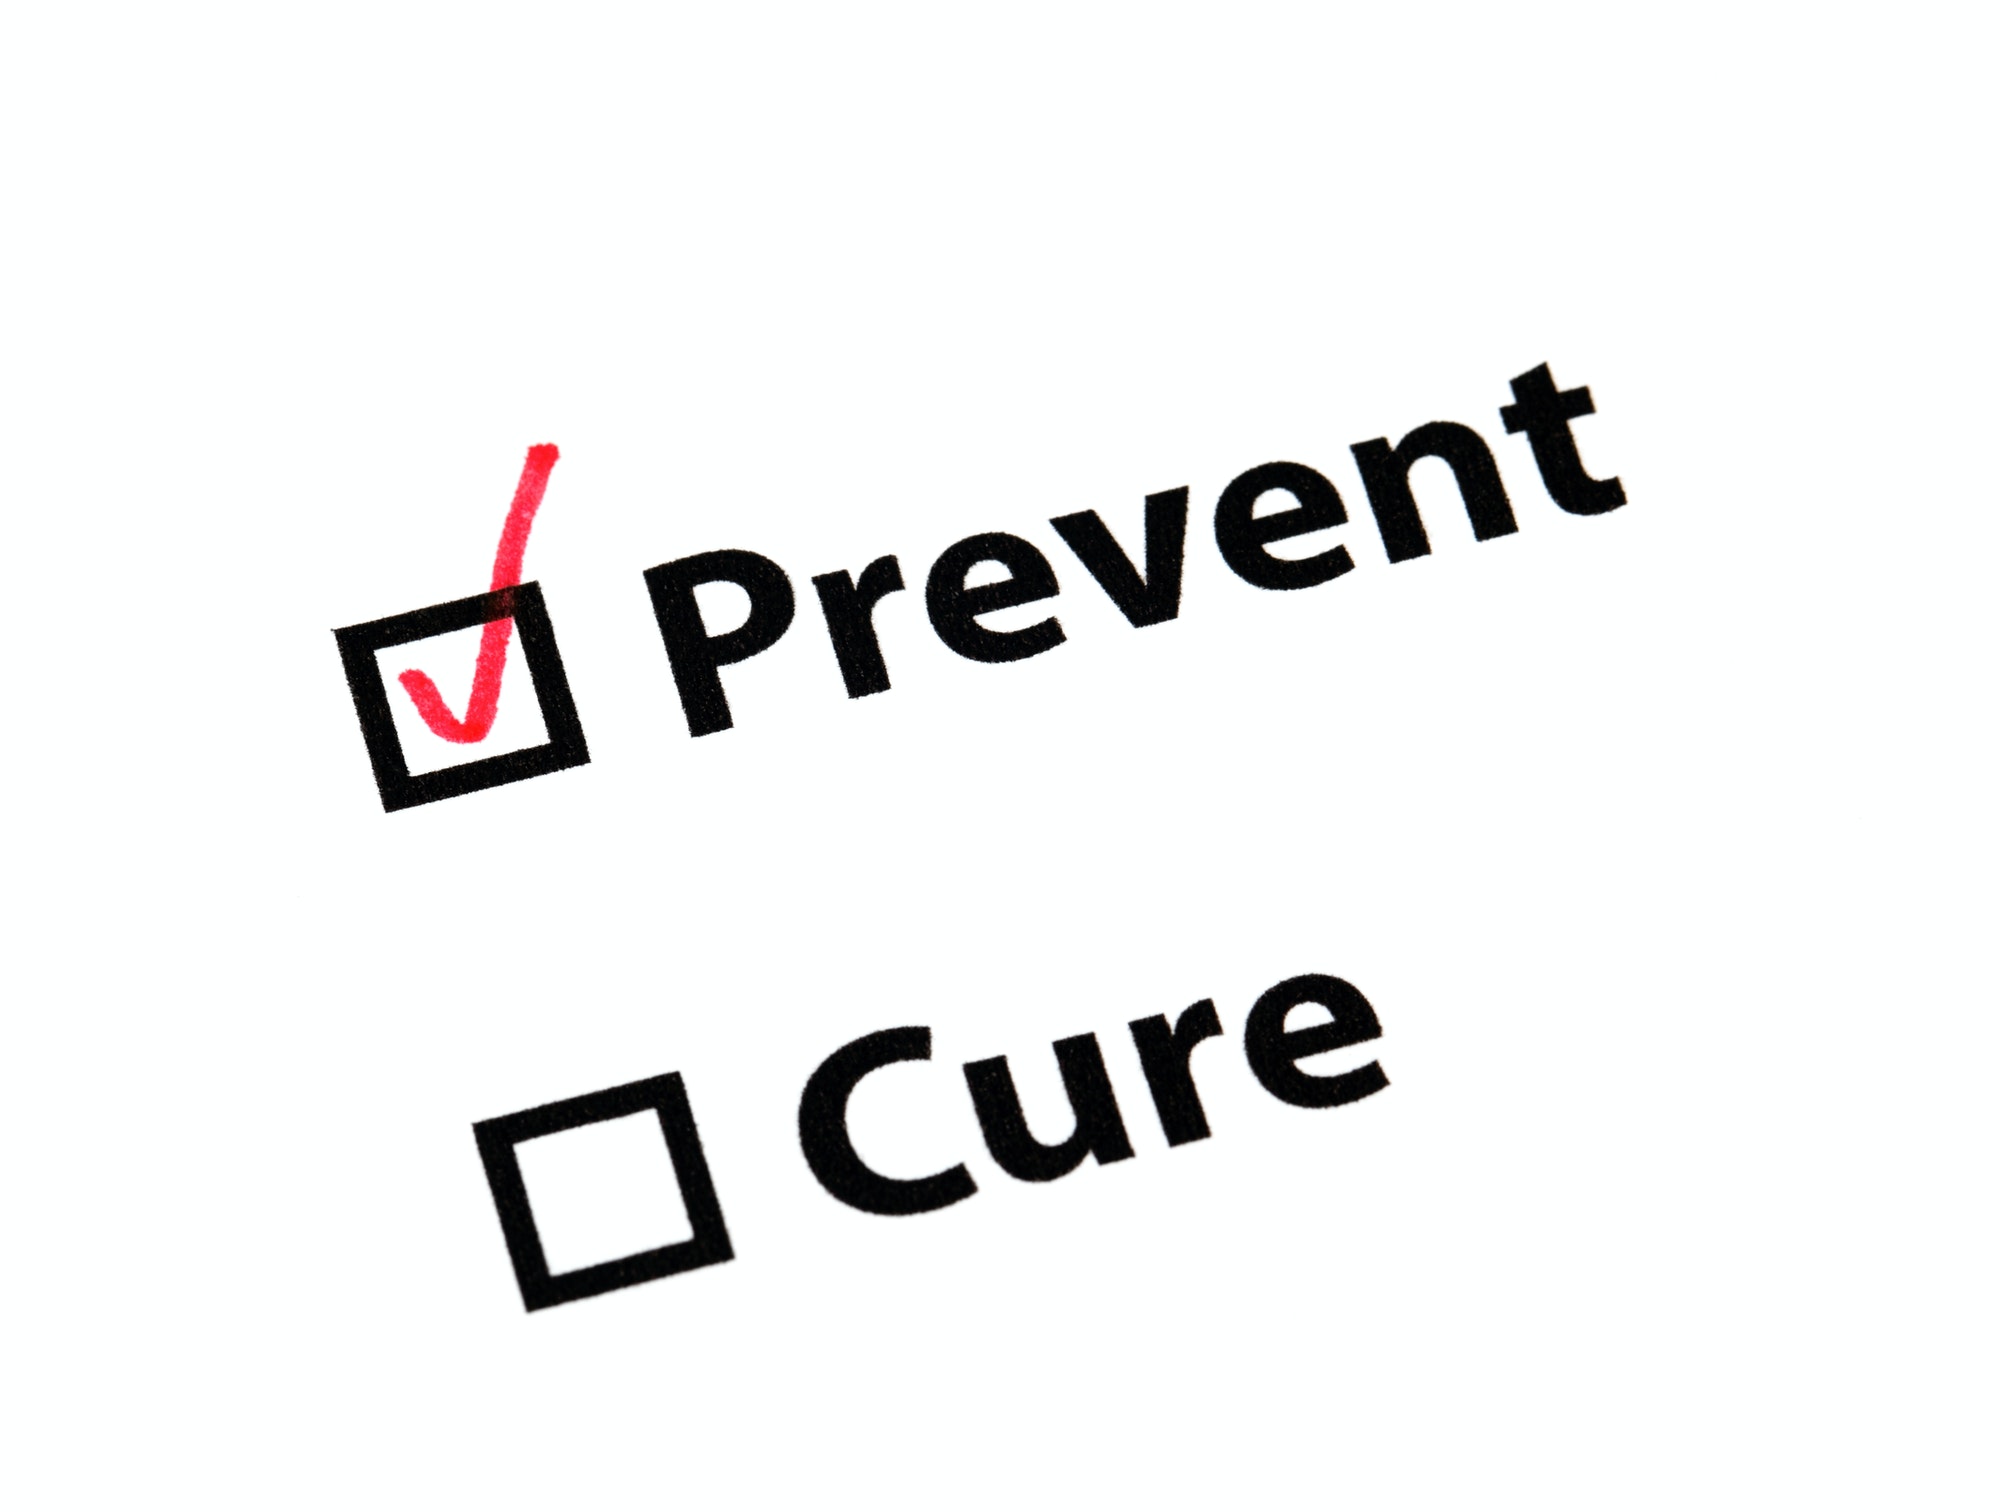 Prevent better than cure